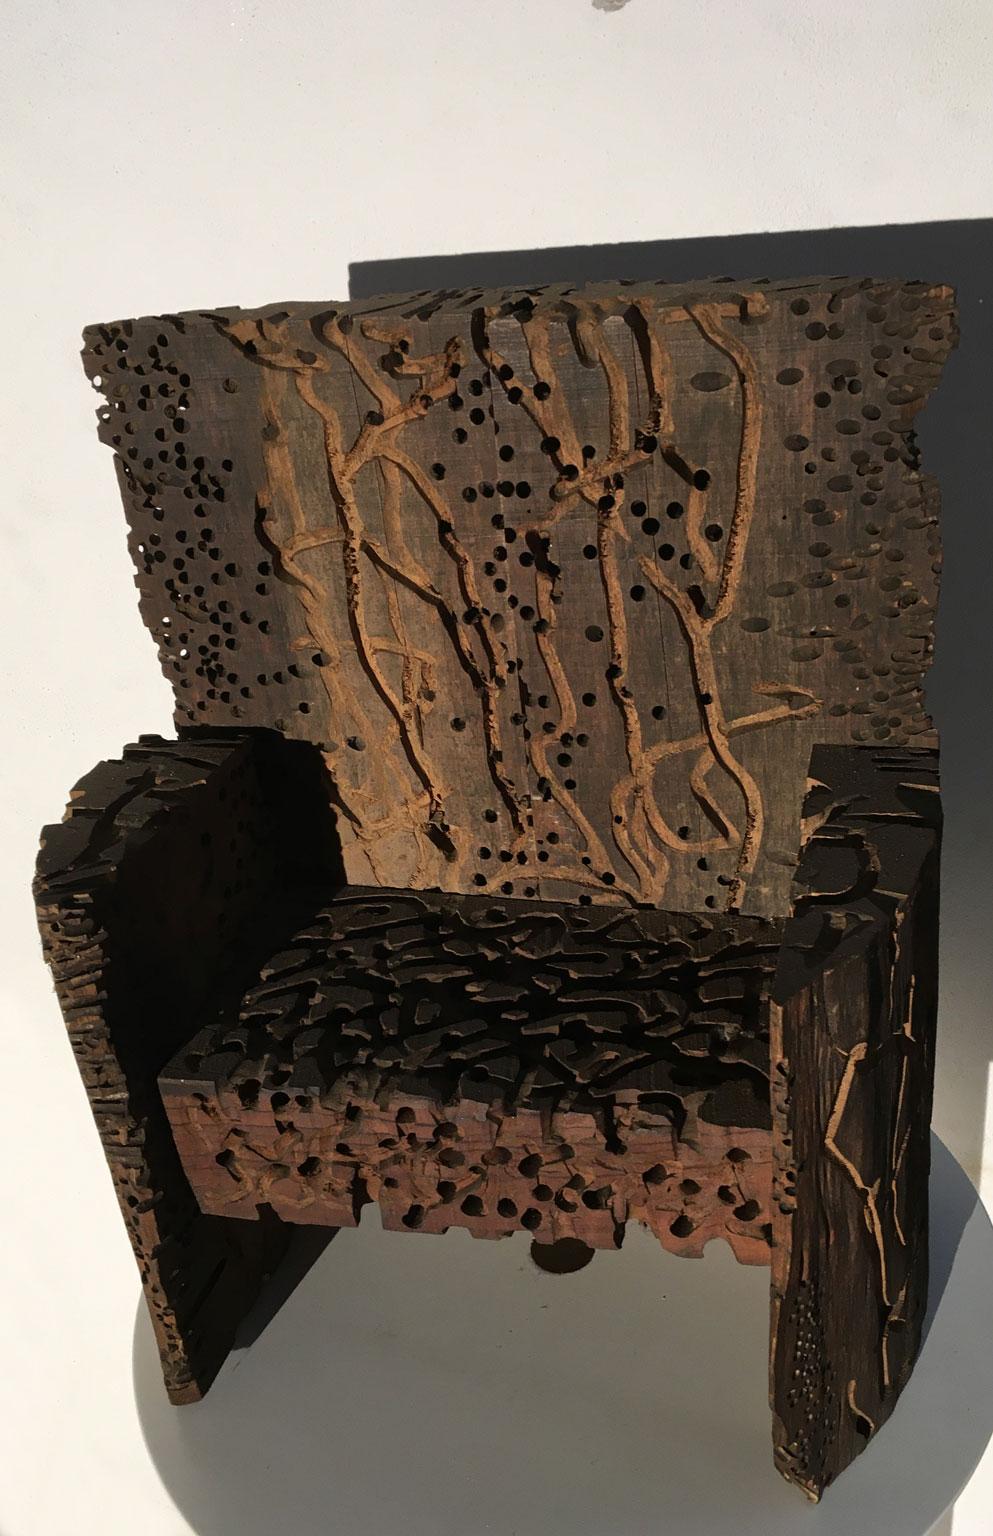 1985 Italy Wooden Abstract Sculpture by Urano Palma Grande Trono Big Throne For Sale 5